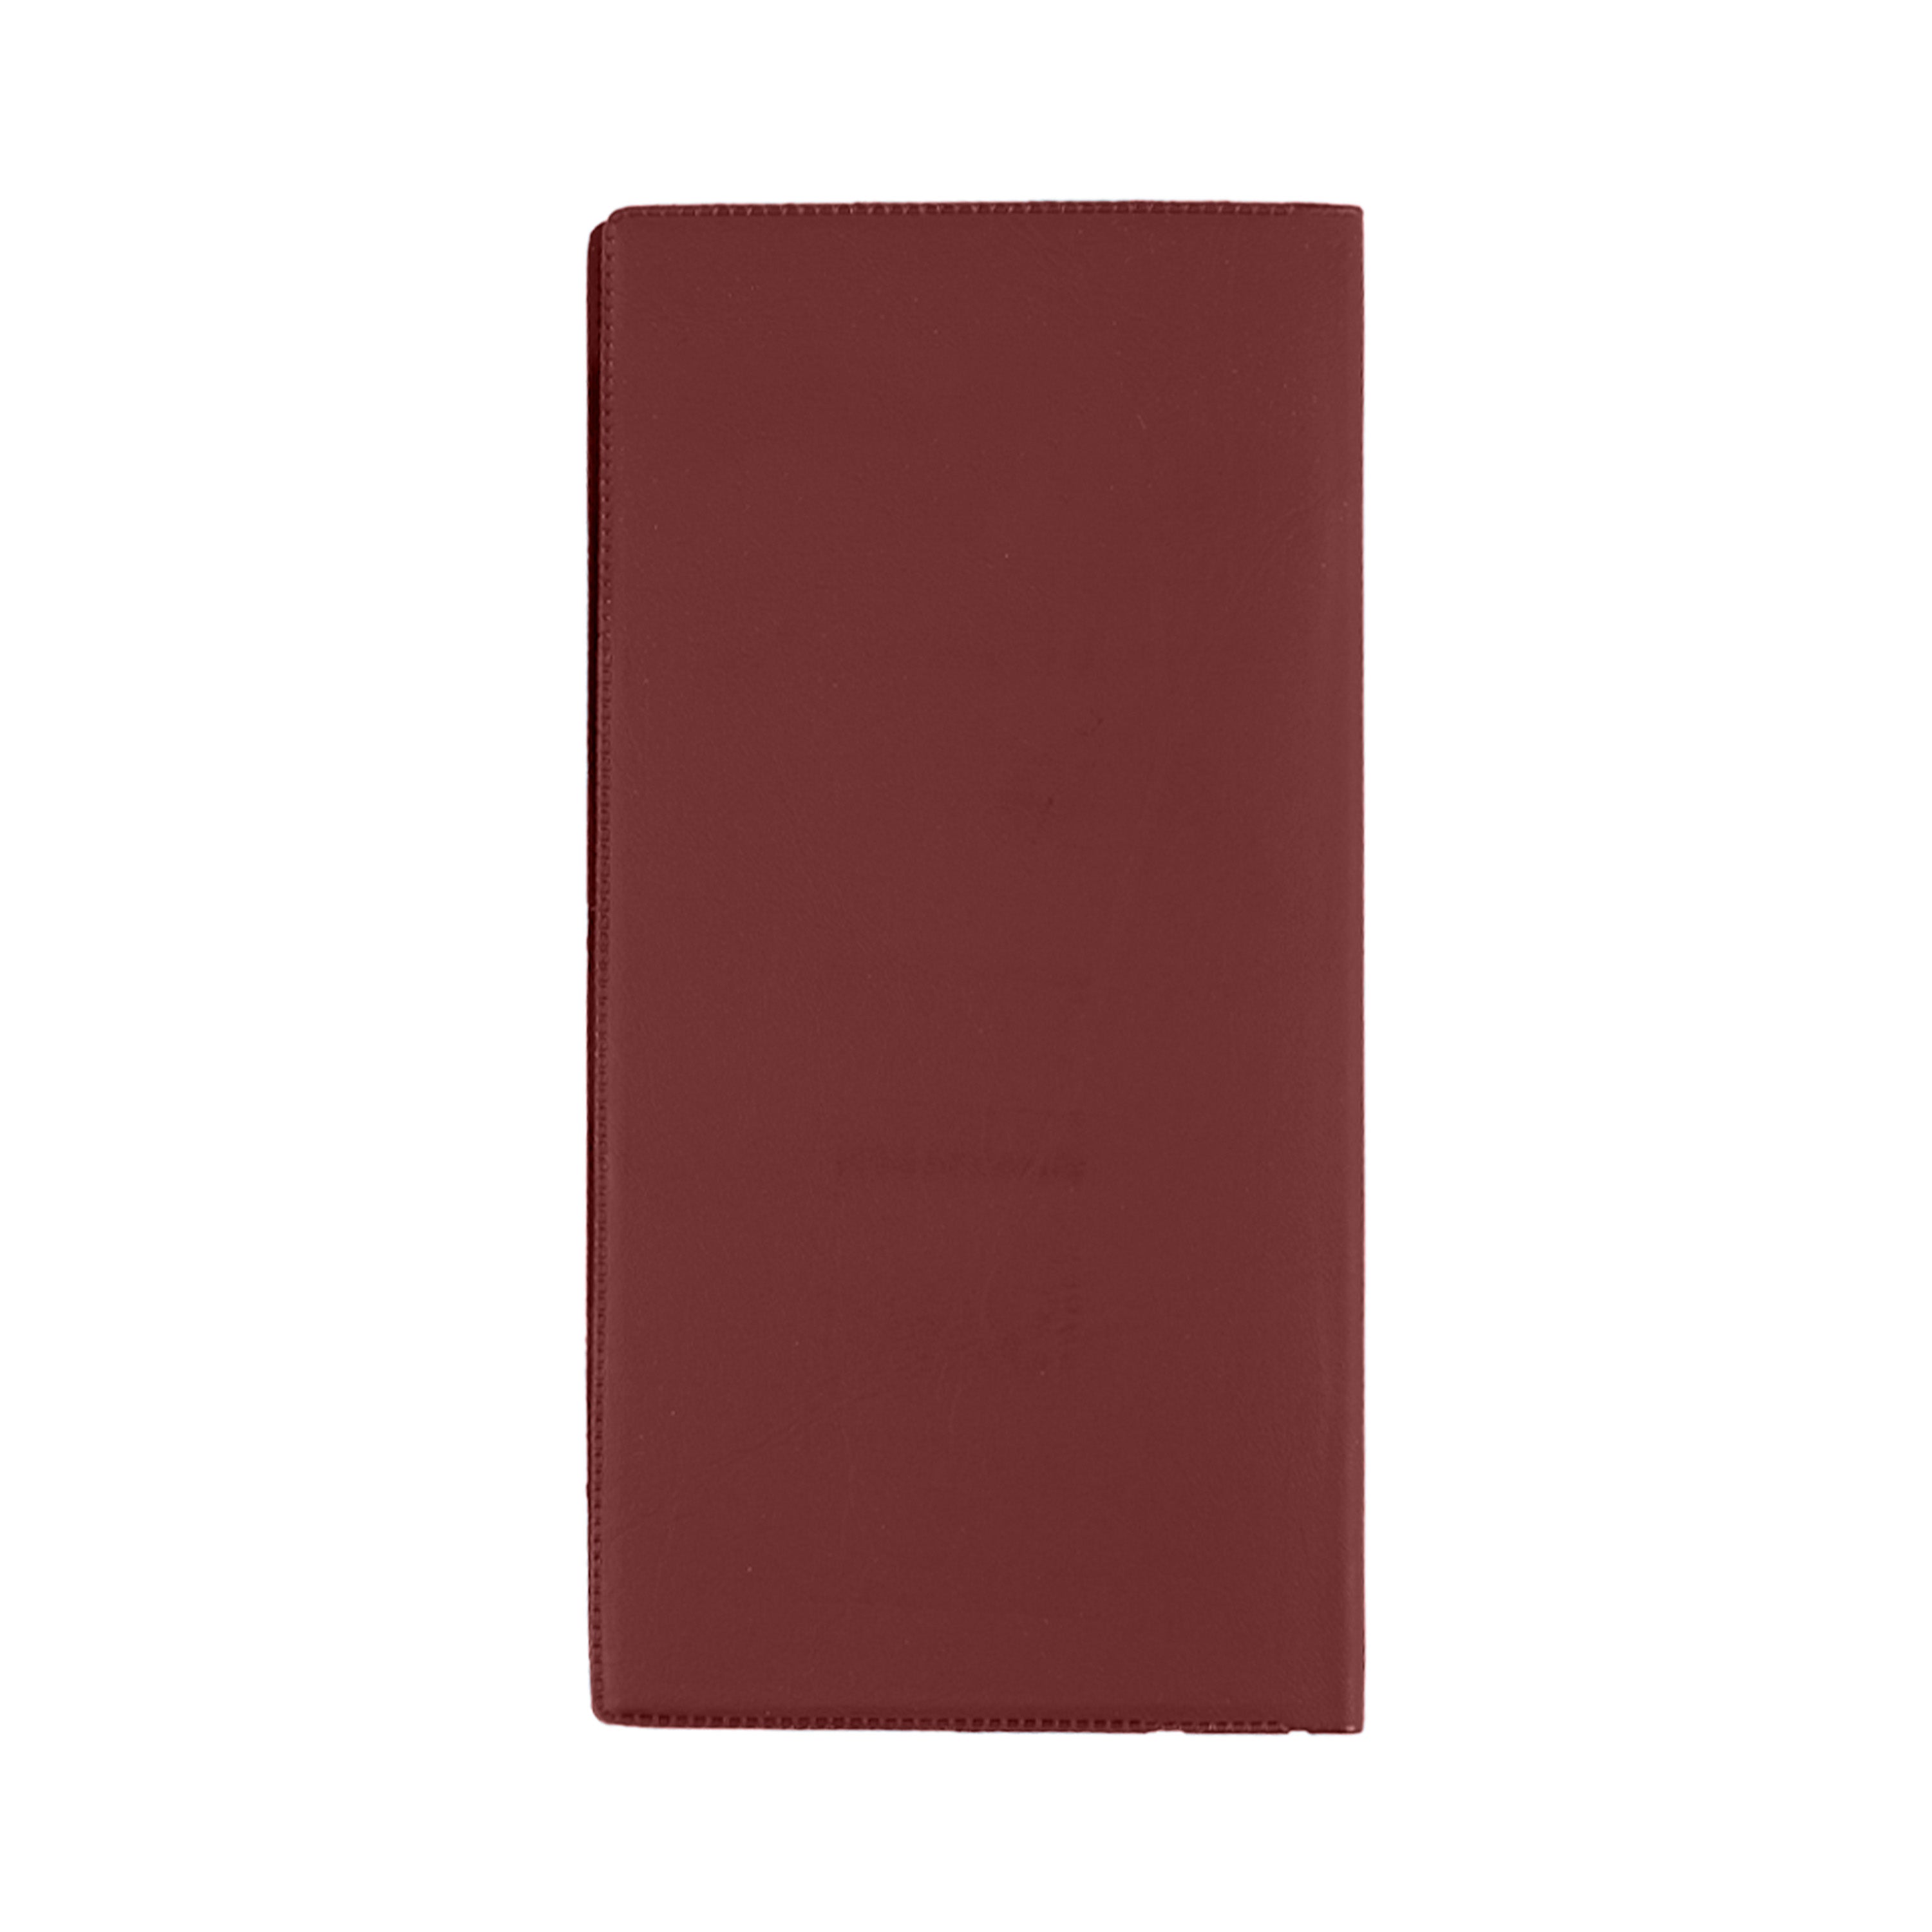 Colplan 2024 Diary - Month to View (Plain), Size B6/7 red / B6/7 (176 x 88mm)